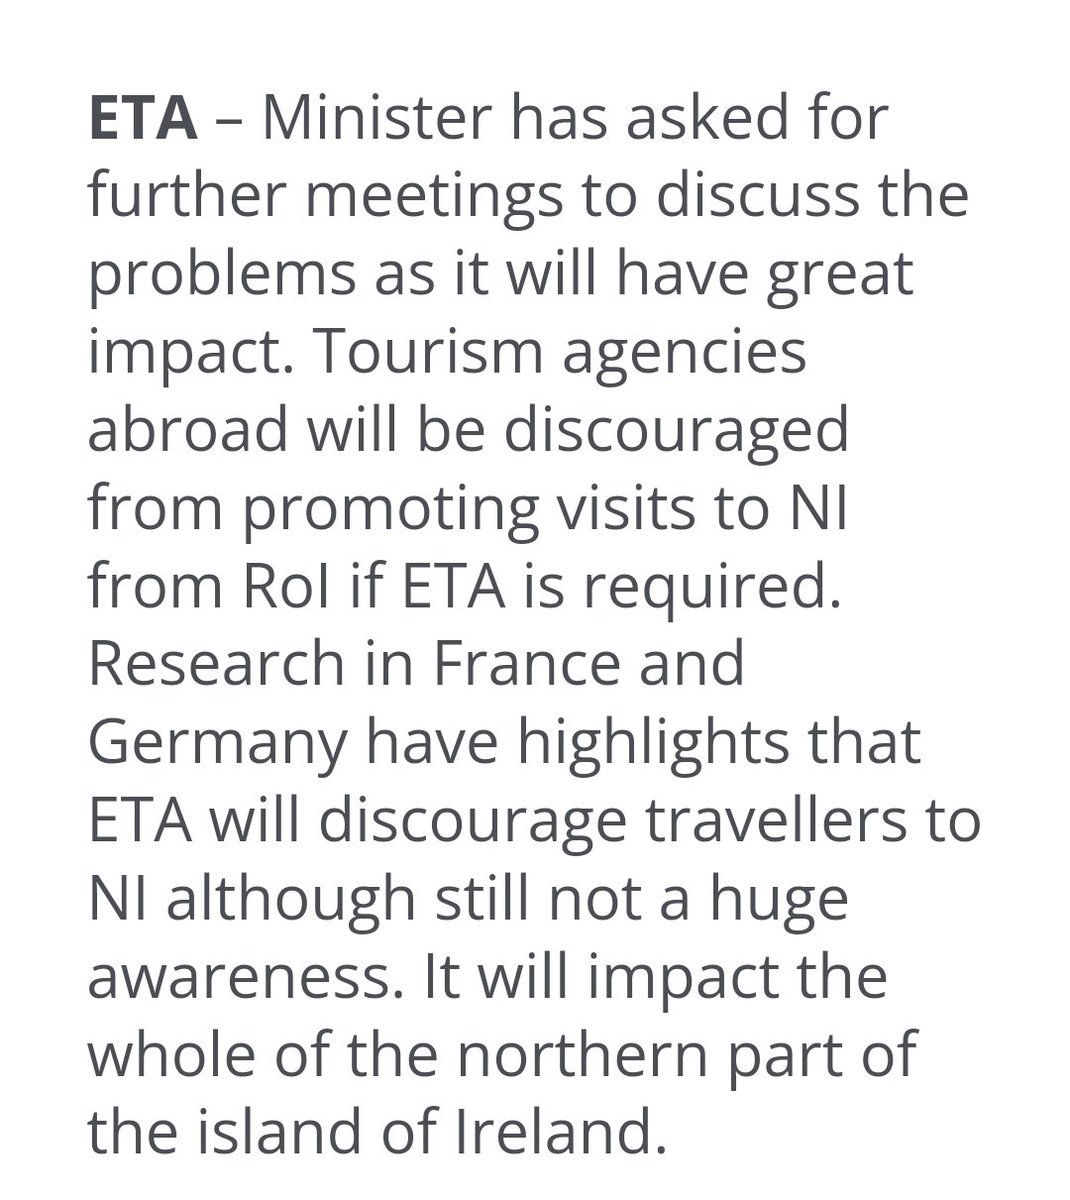 Northern-ireland Tourist Alliance points out the potential threat to tourism in NI.... something the 🇬🇧 Gov doesn't appear to be taking seriously.... @NIrelandTA @NITouristBoard